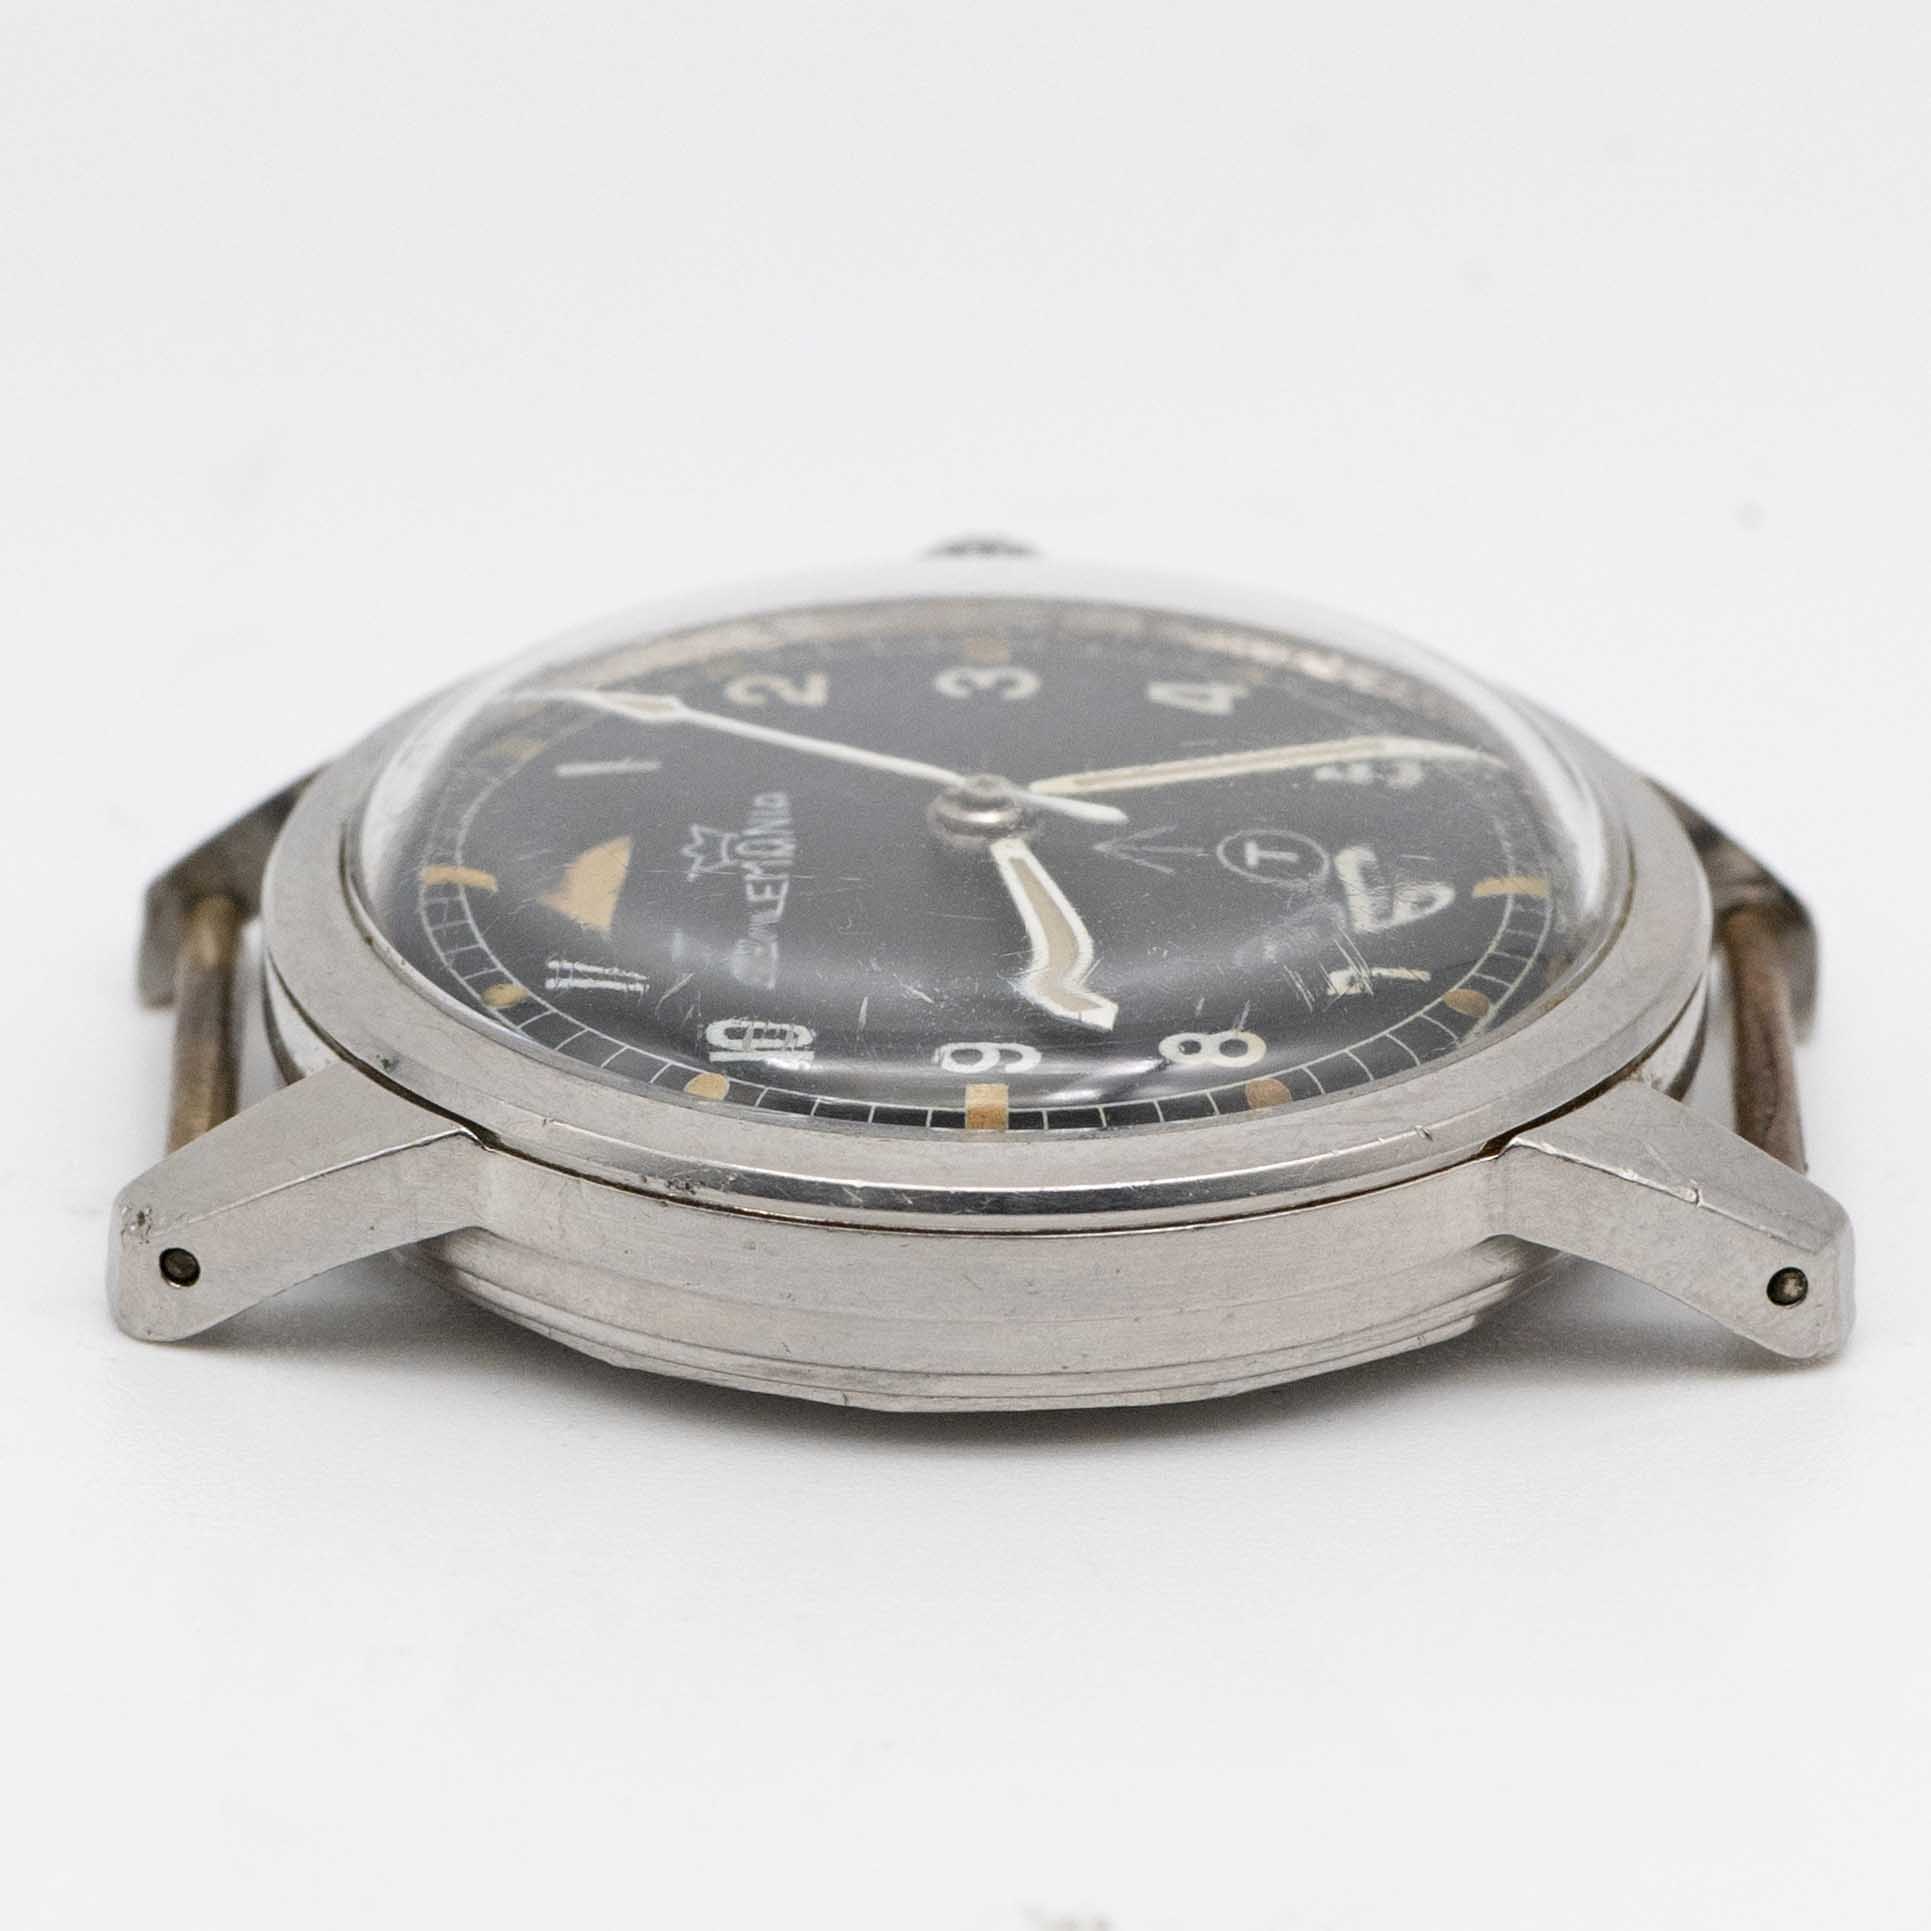 A RARE GENTLEMAN'S STAINLESS STEEL BRITISH MILITARY ROYAL NAVY LEMANIA WRIST WATCH DATED 1965, - Image 10 of 10